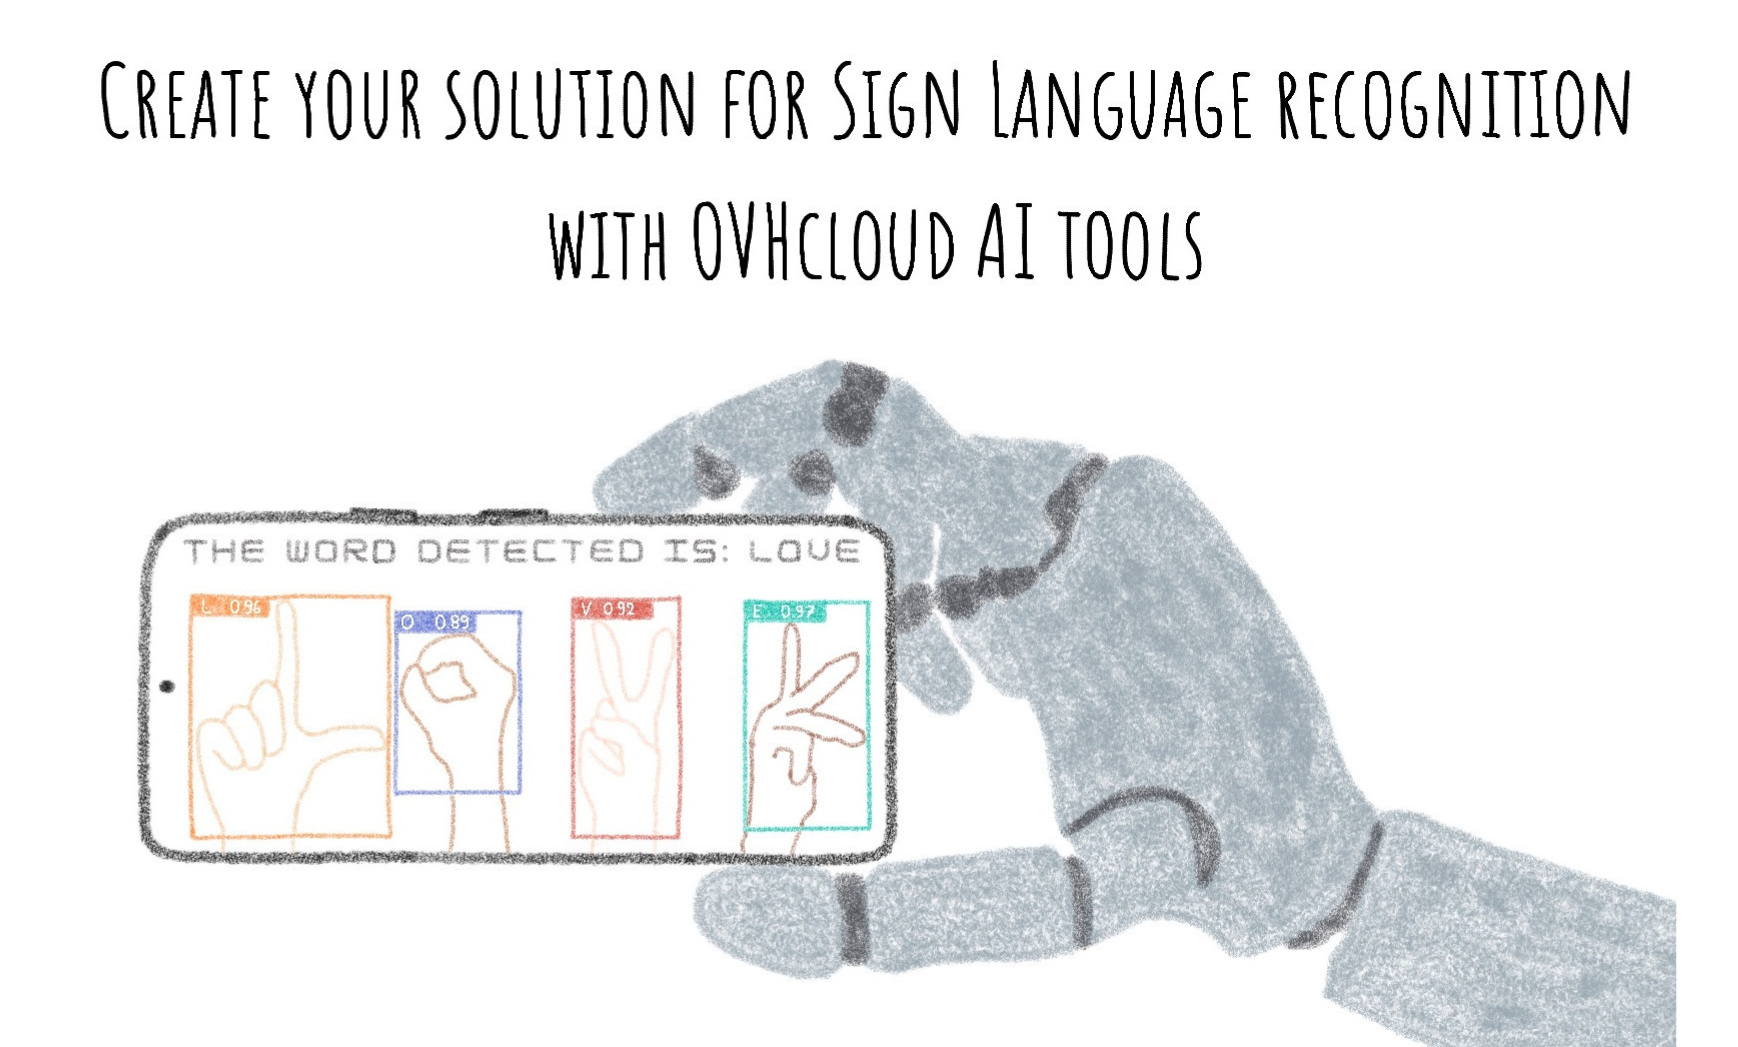 Sign Language recognition with AI